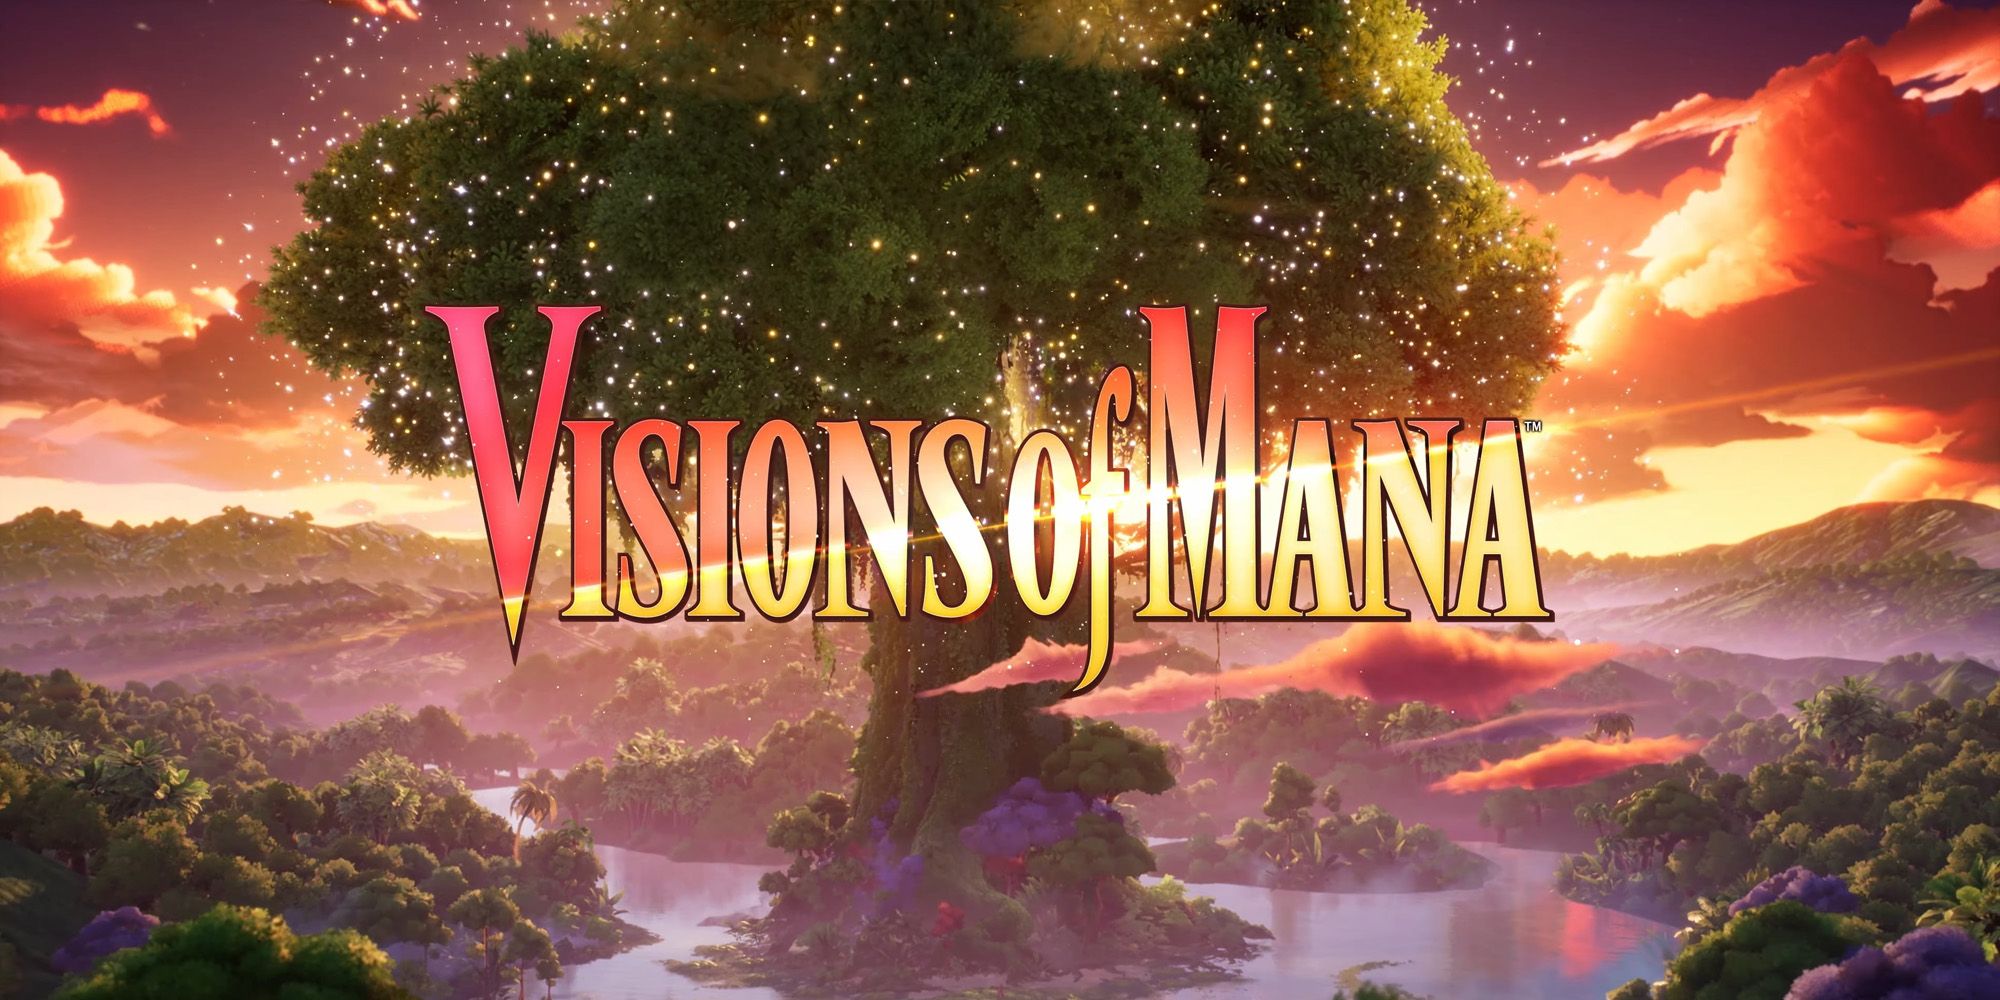 Visions of Mana Title Card showing the Tree of Mana.